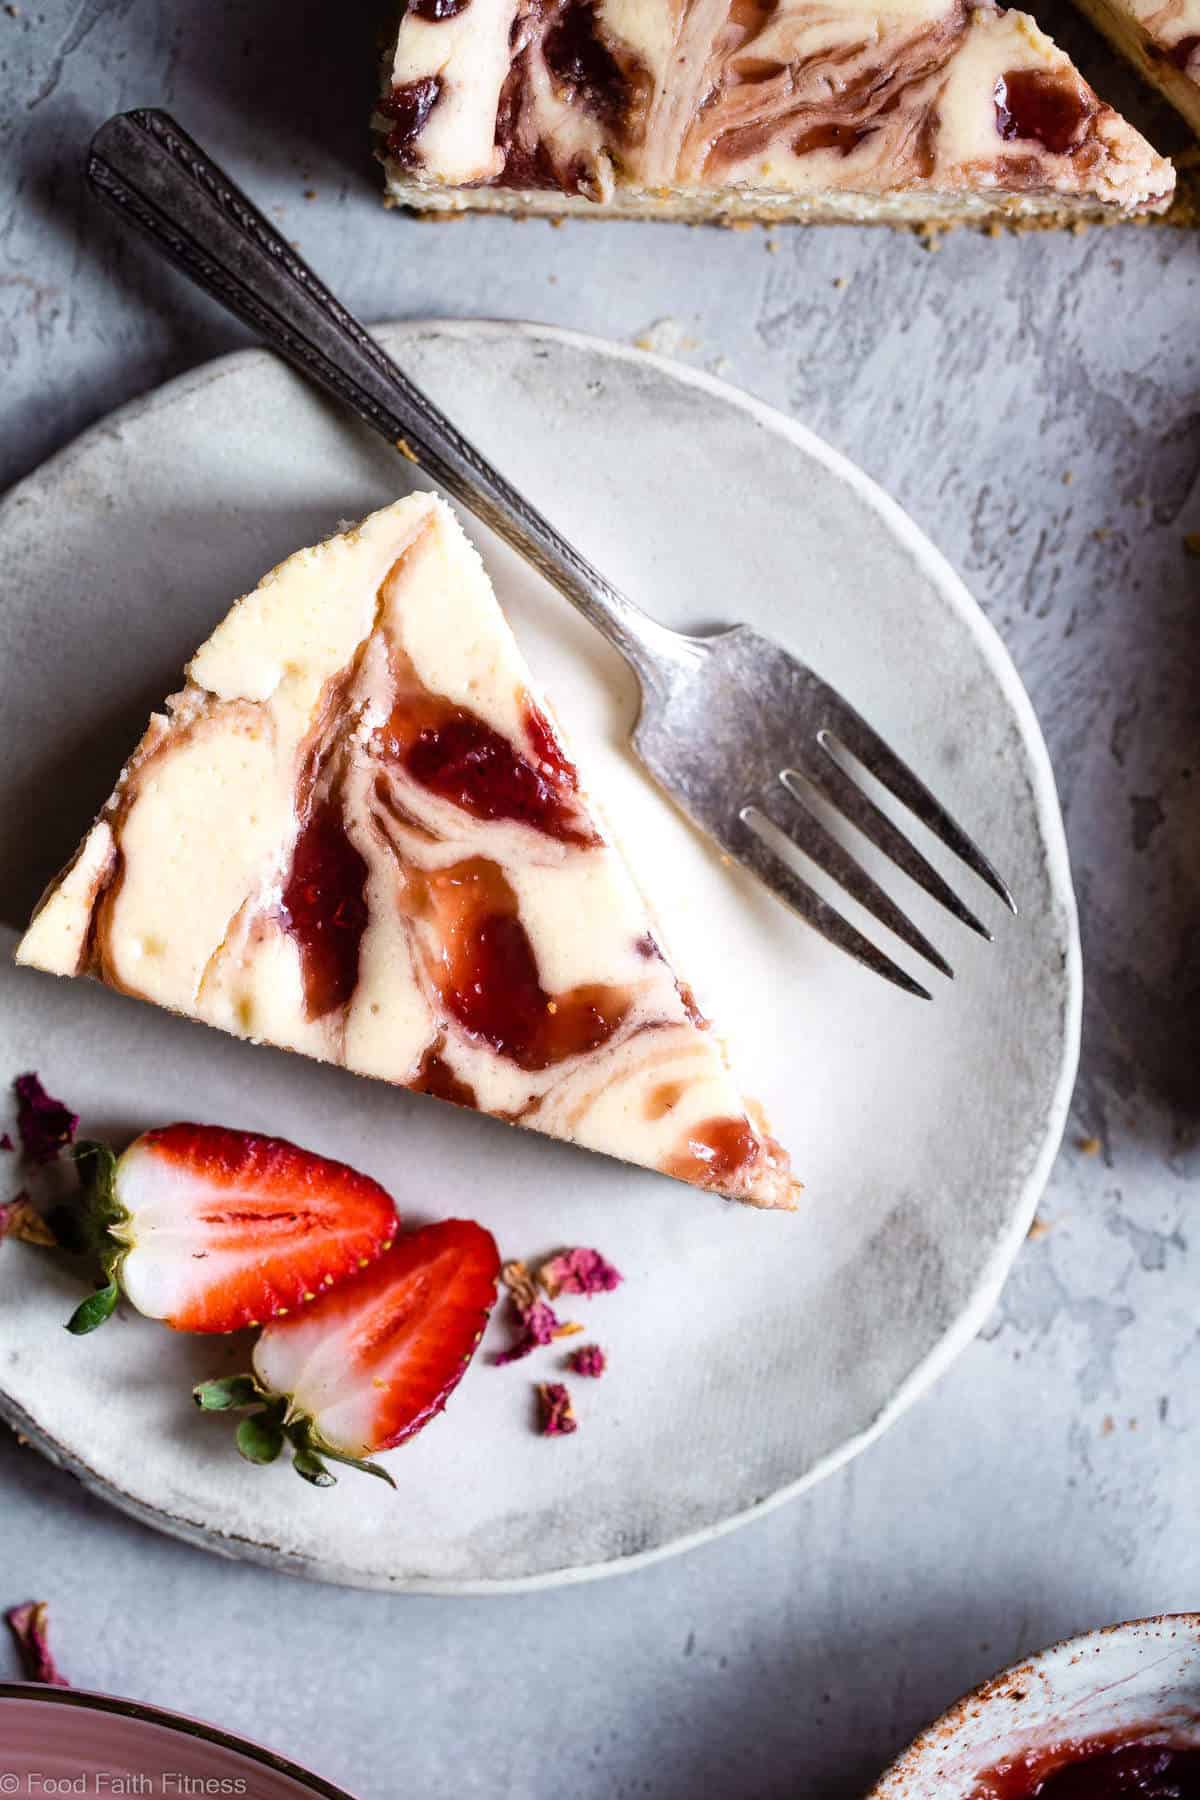 Gluten Free Strawberry Swirled Cottage Cheese Cheesecake - This Healthy Cottage Cheese Cheesecake is packed with protein and is so easy to make! Gluten free, grain free, better for you and SO creamy! | #Foodfaithfitness | #Glutenfree #Grainfree #Healthy #Cheesecake #Cottagecheese